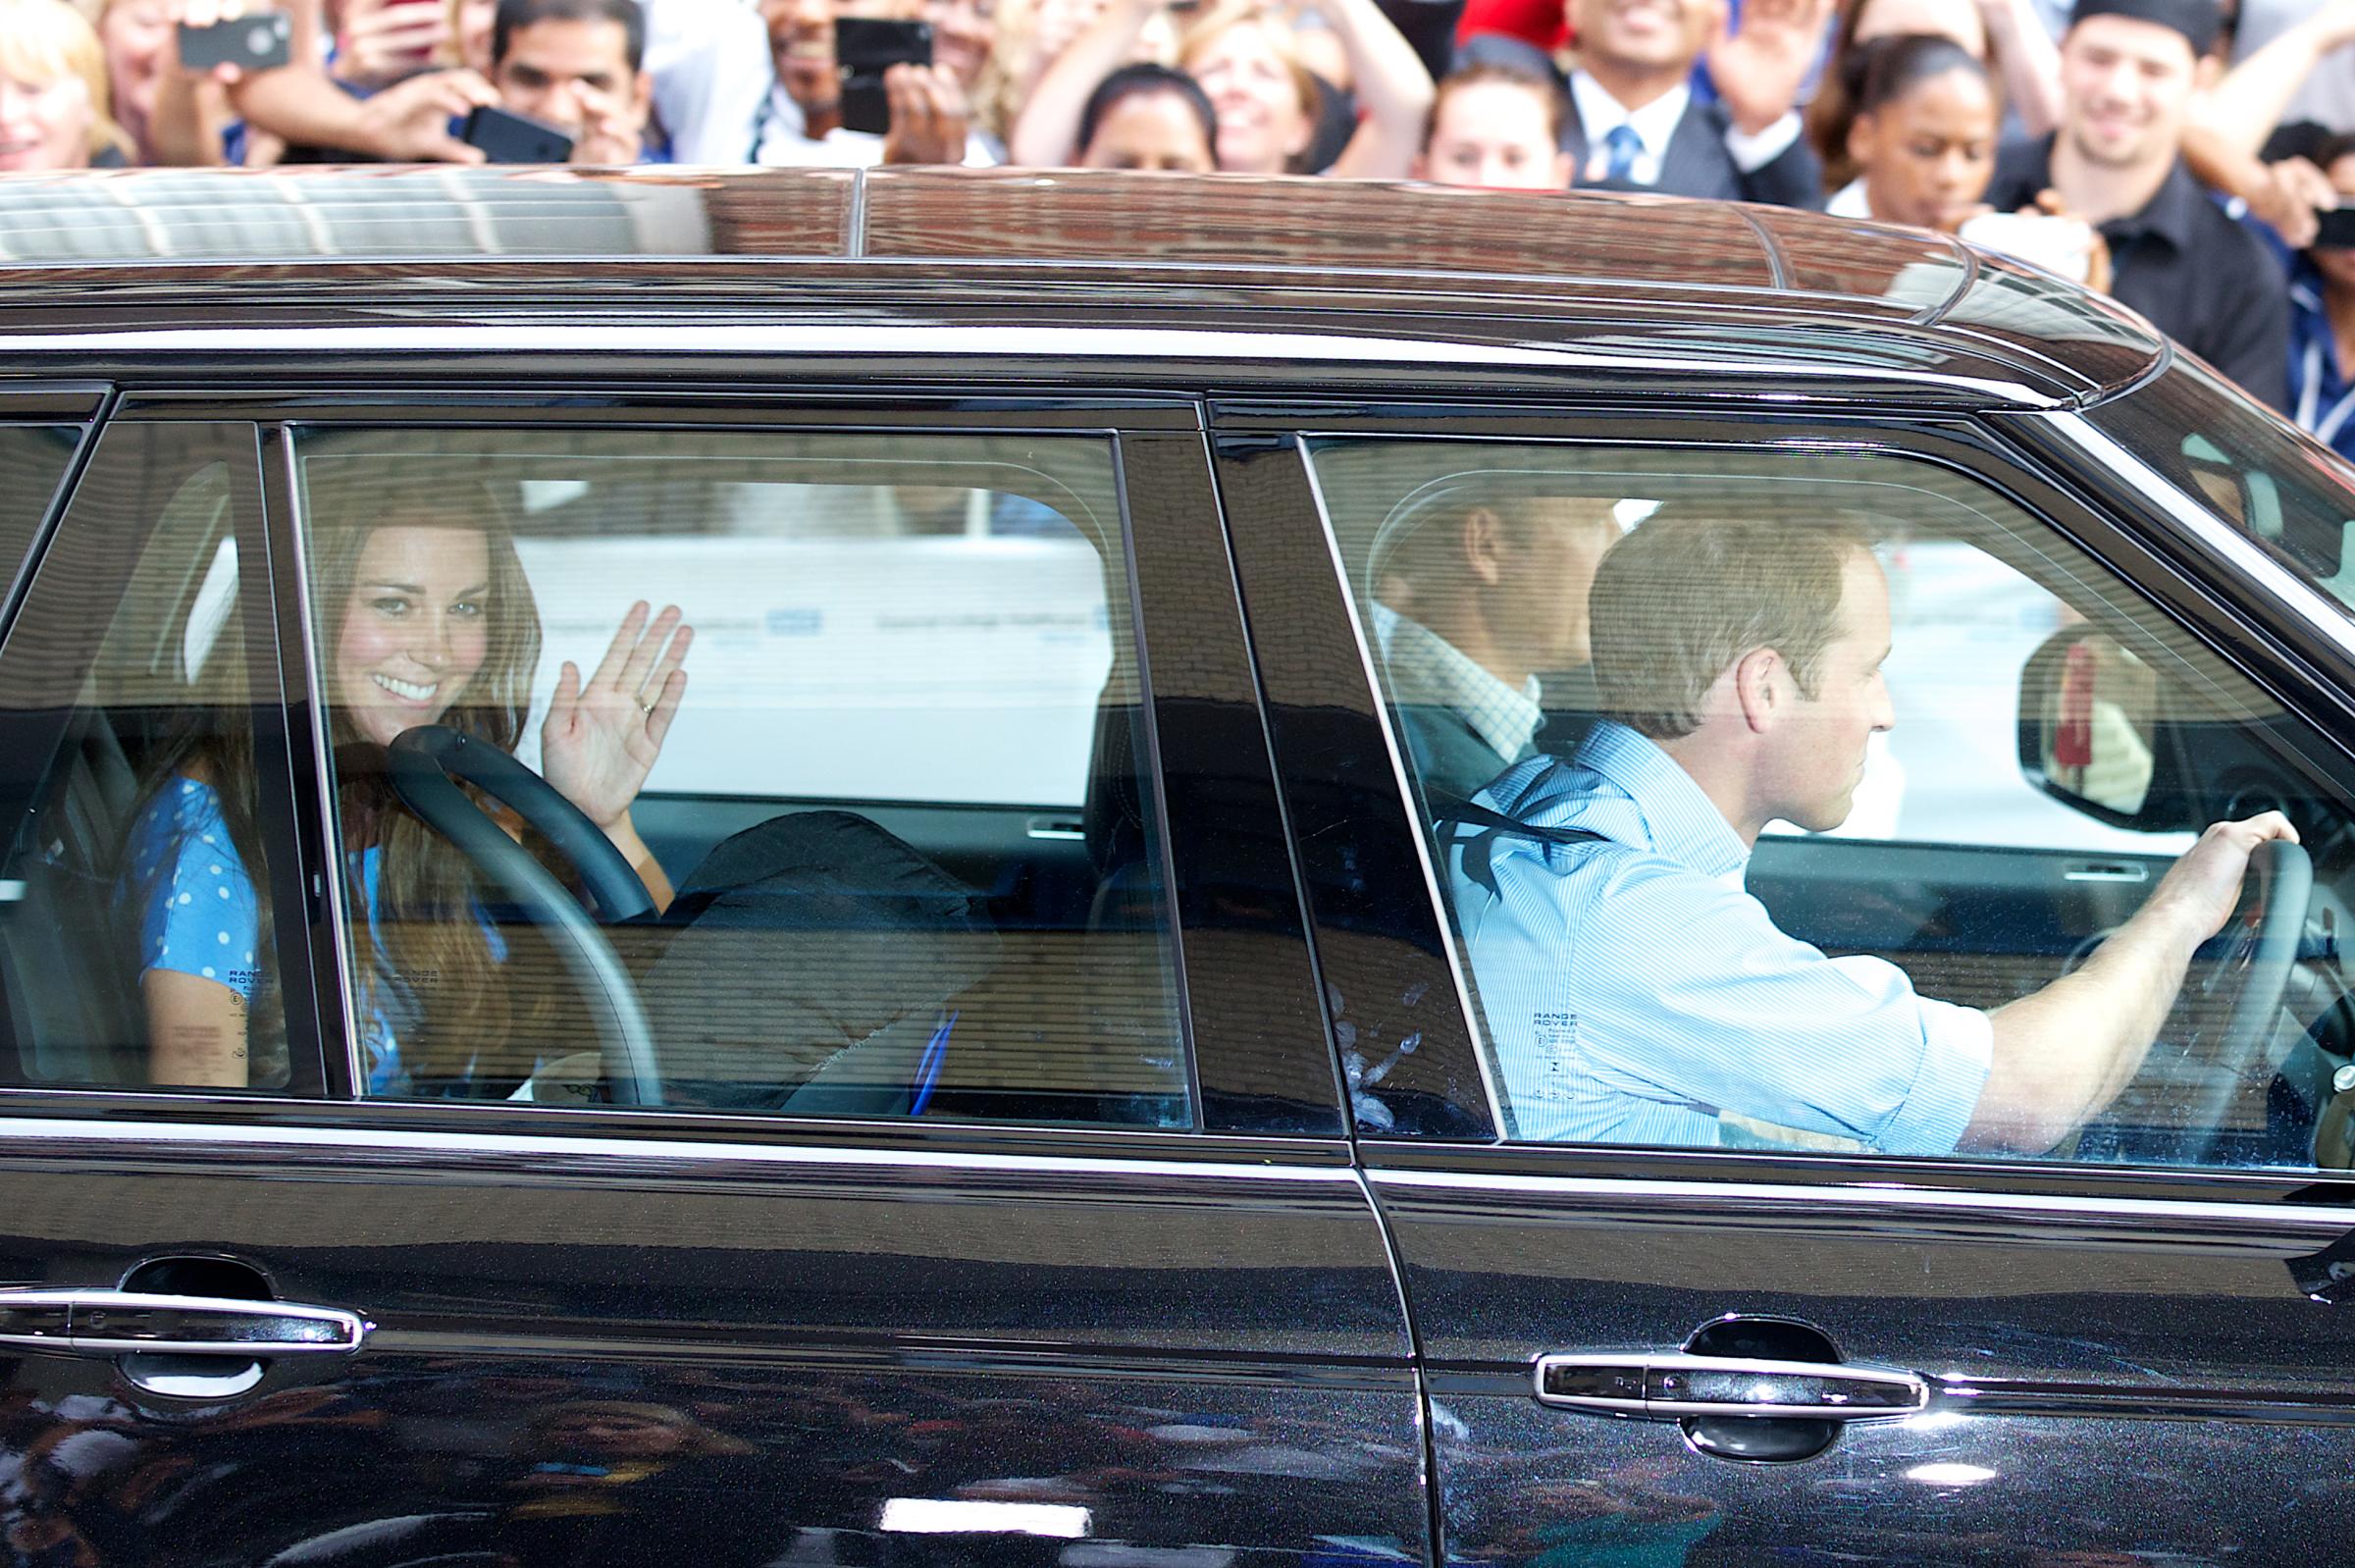 Catherine, Duchess of Cambridge (L) waves as she is driven by her husband, William, the Duke of Cambridge away from Lindo Wing of St Mary's Hospital in London on July 23, 2013. Her baby was born on Monday afternoon weighing eight pounds six ounces (3.8 kilogrammes). The baby, titled His Royal Highness, Prince (name) of Cambridge, is directly in line to inherit the throne after Charles, Queen Elizabeth II's eldest son and heir, and his eldest son William. AFP PHOTO / ANDREW COWIE (Photo credit should read ANDREW COWIE/AFP/Getty Images)